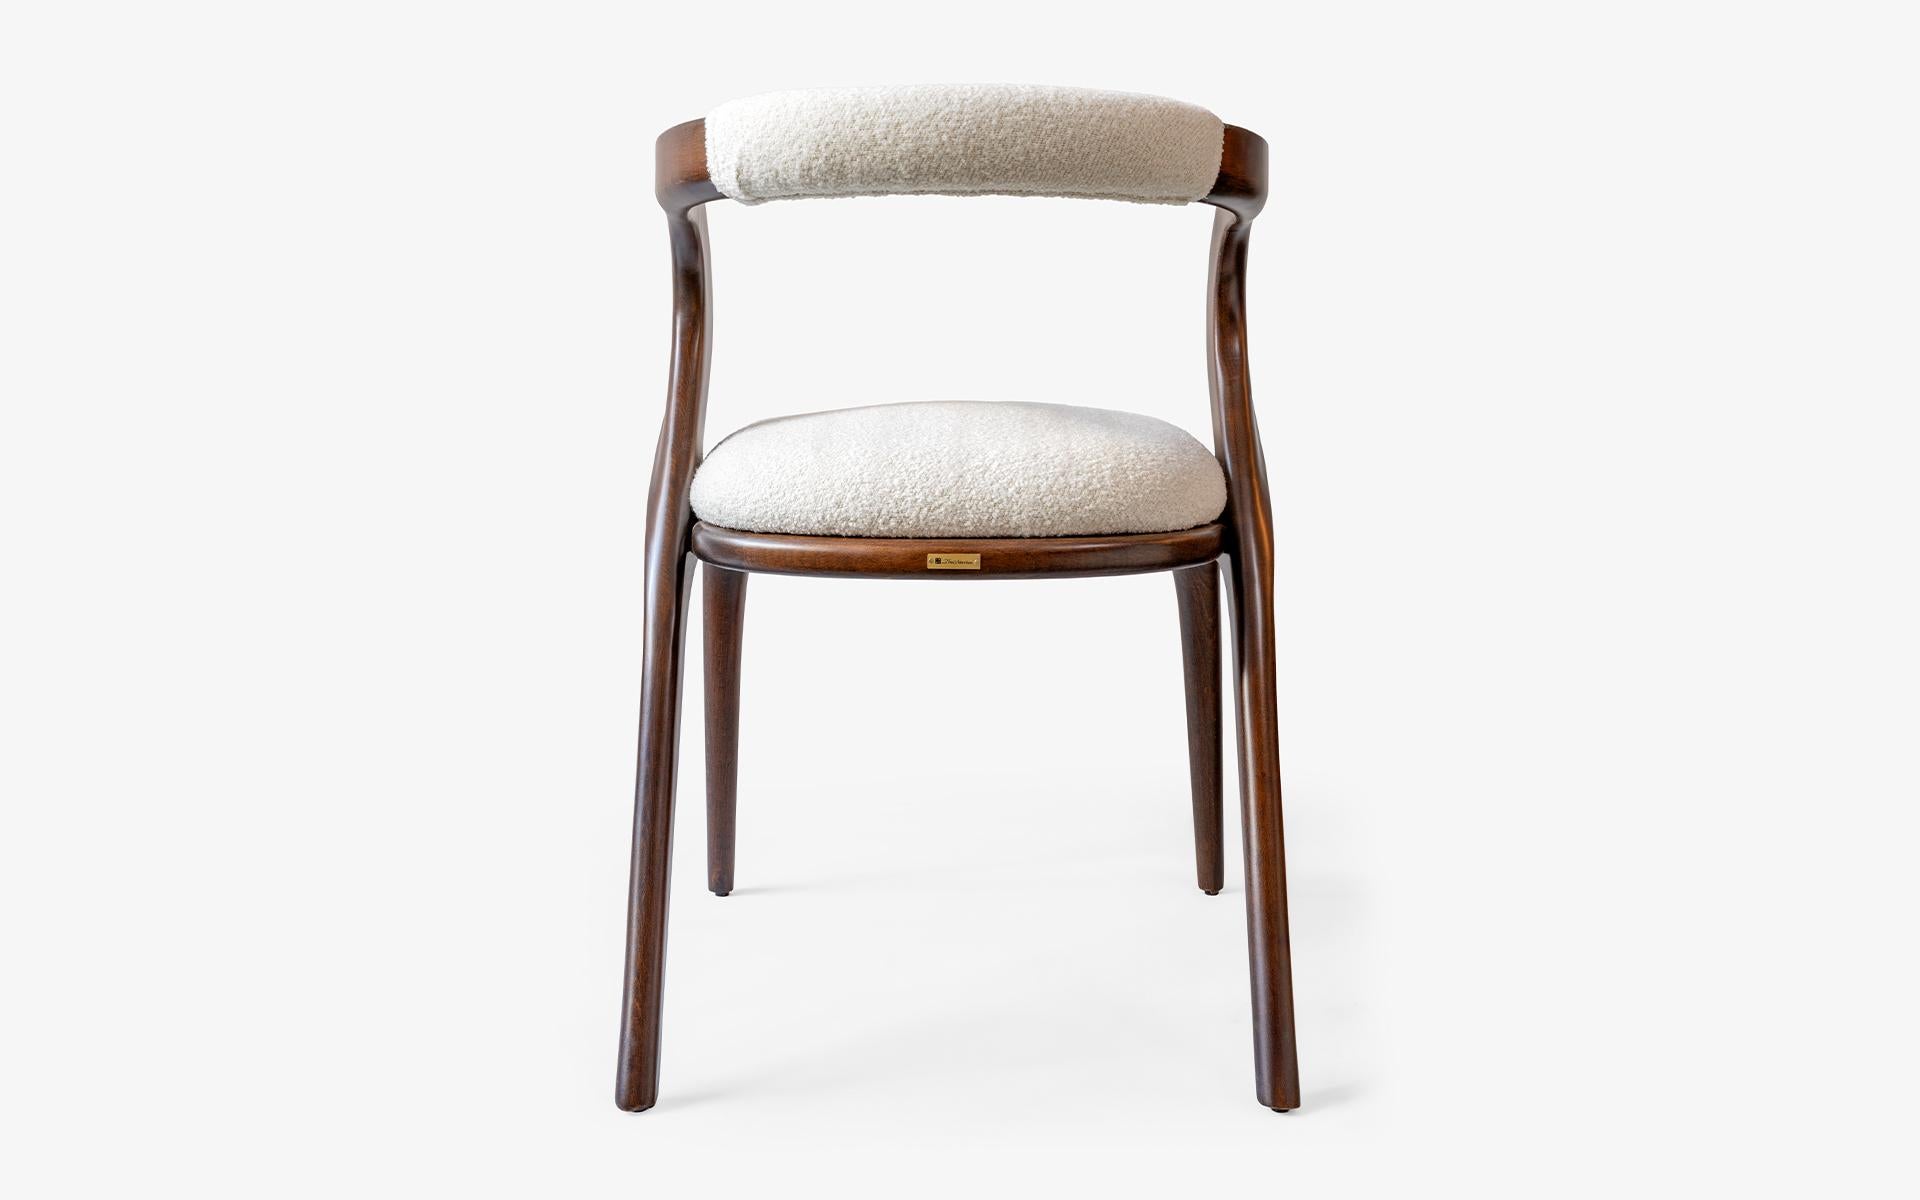 Modern Nana Wooden Dining Chair with Back Detail, No:2, Lagu Selection For Sale